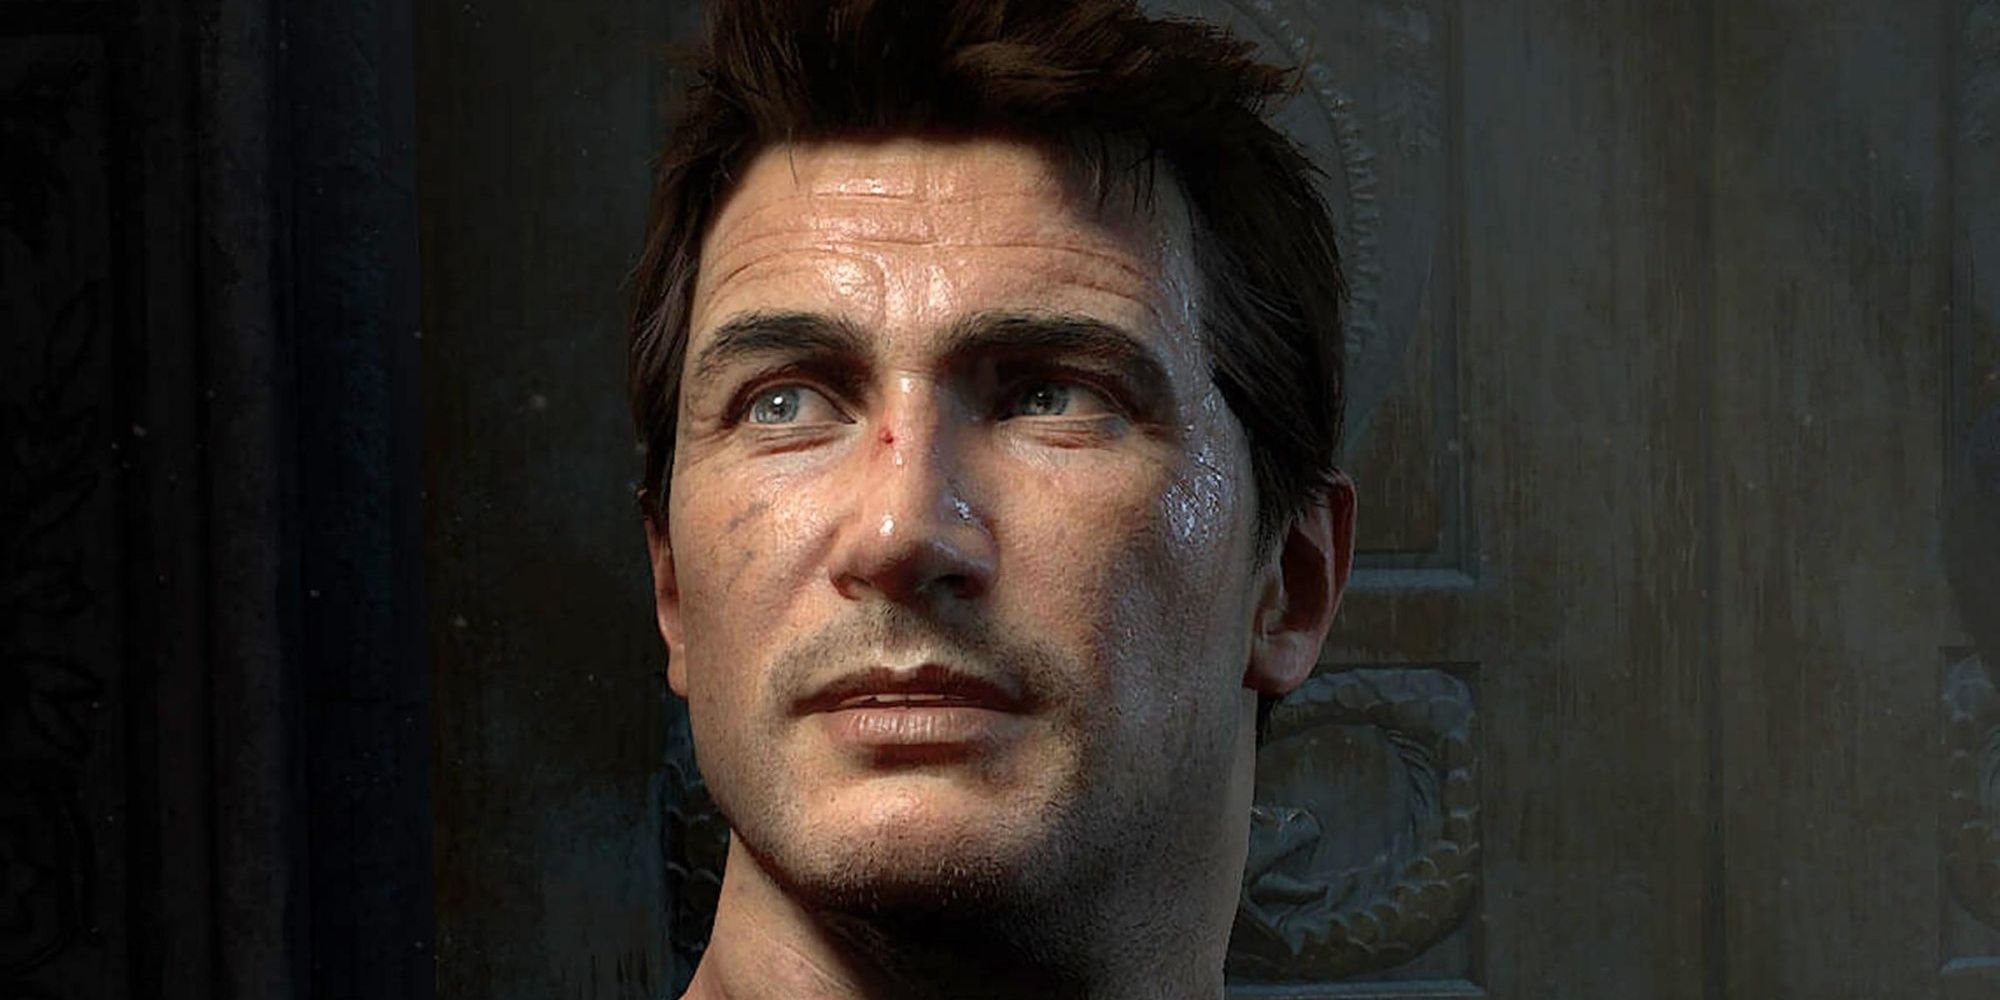 Nate looks up in Uncharted 4 